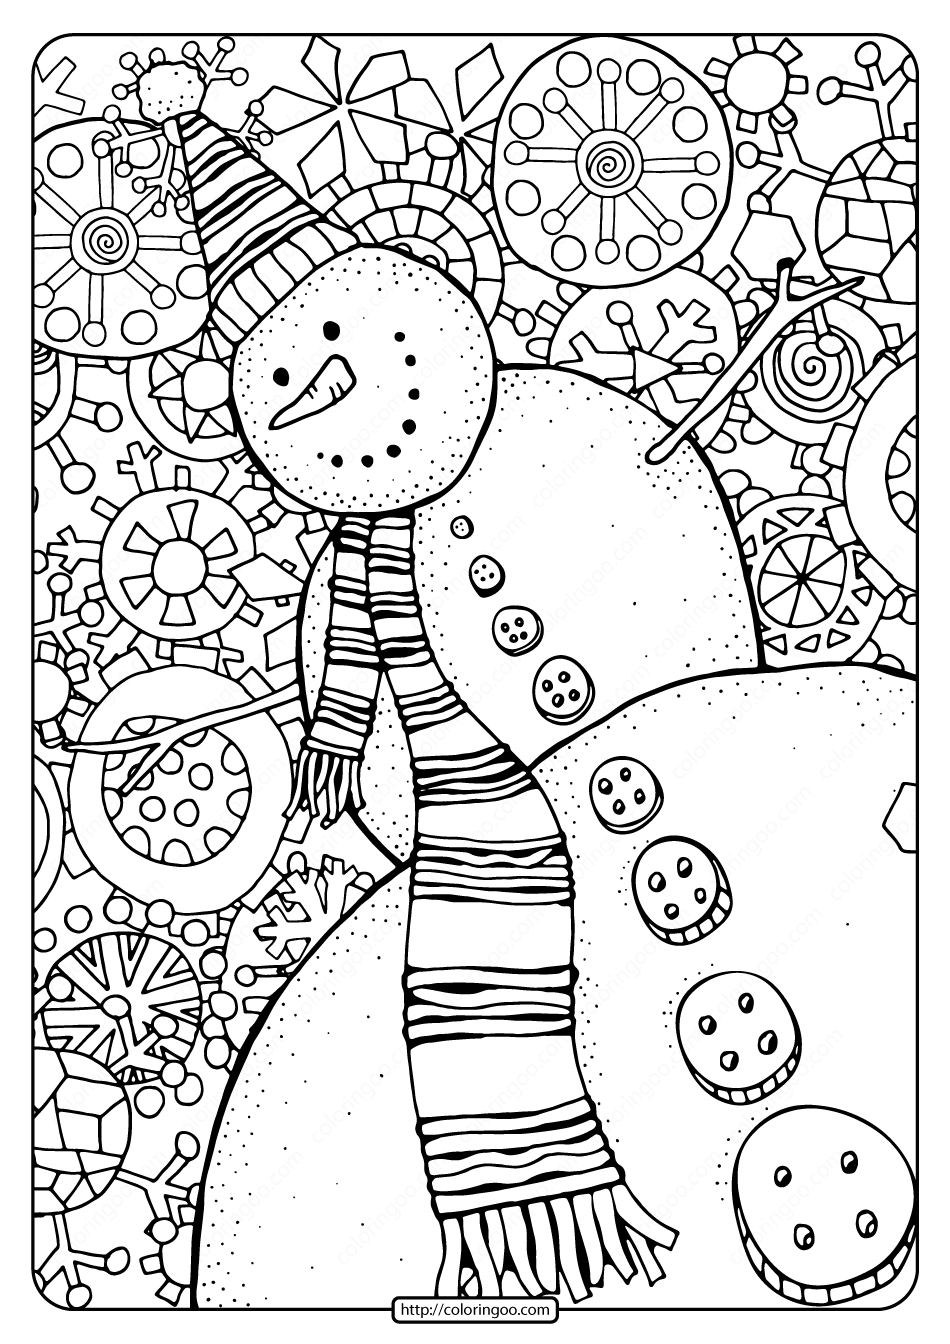 happy snowman with snowflakes pdf coloring page